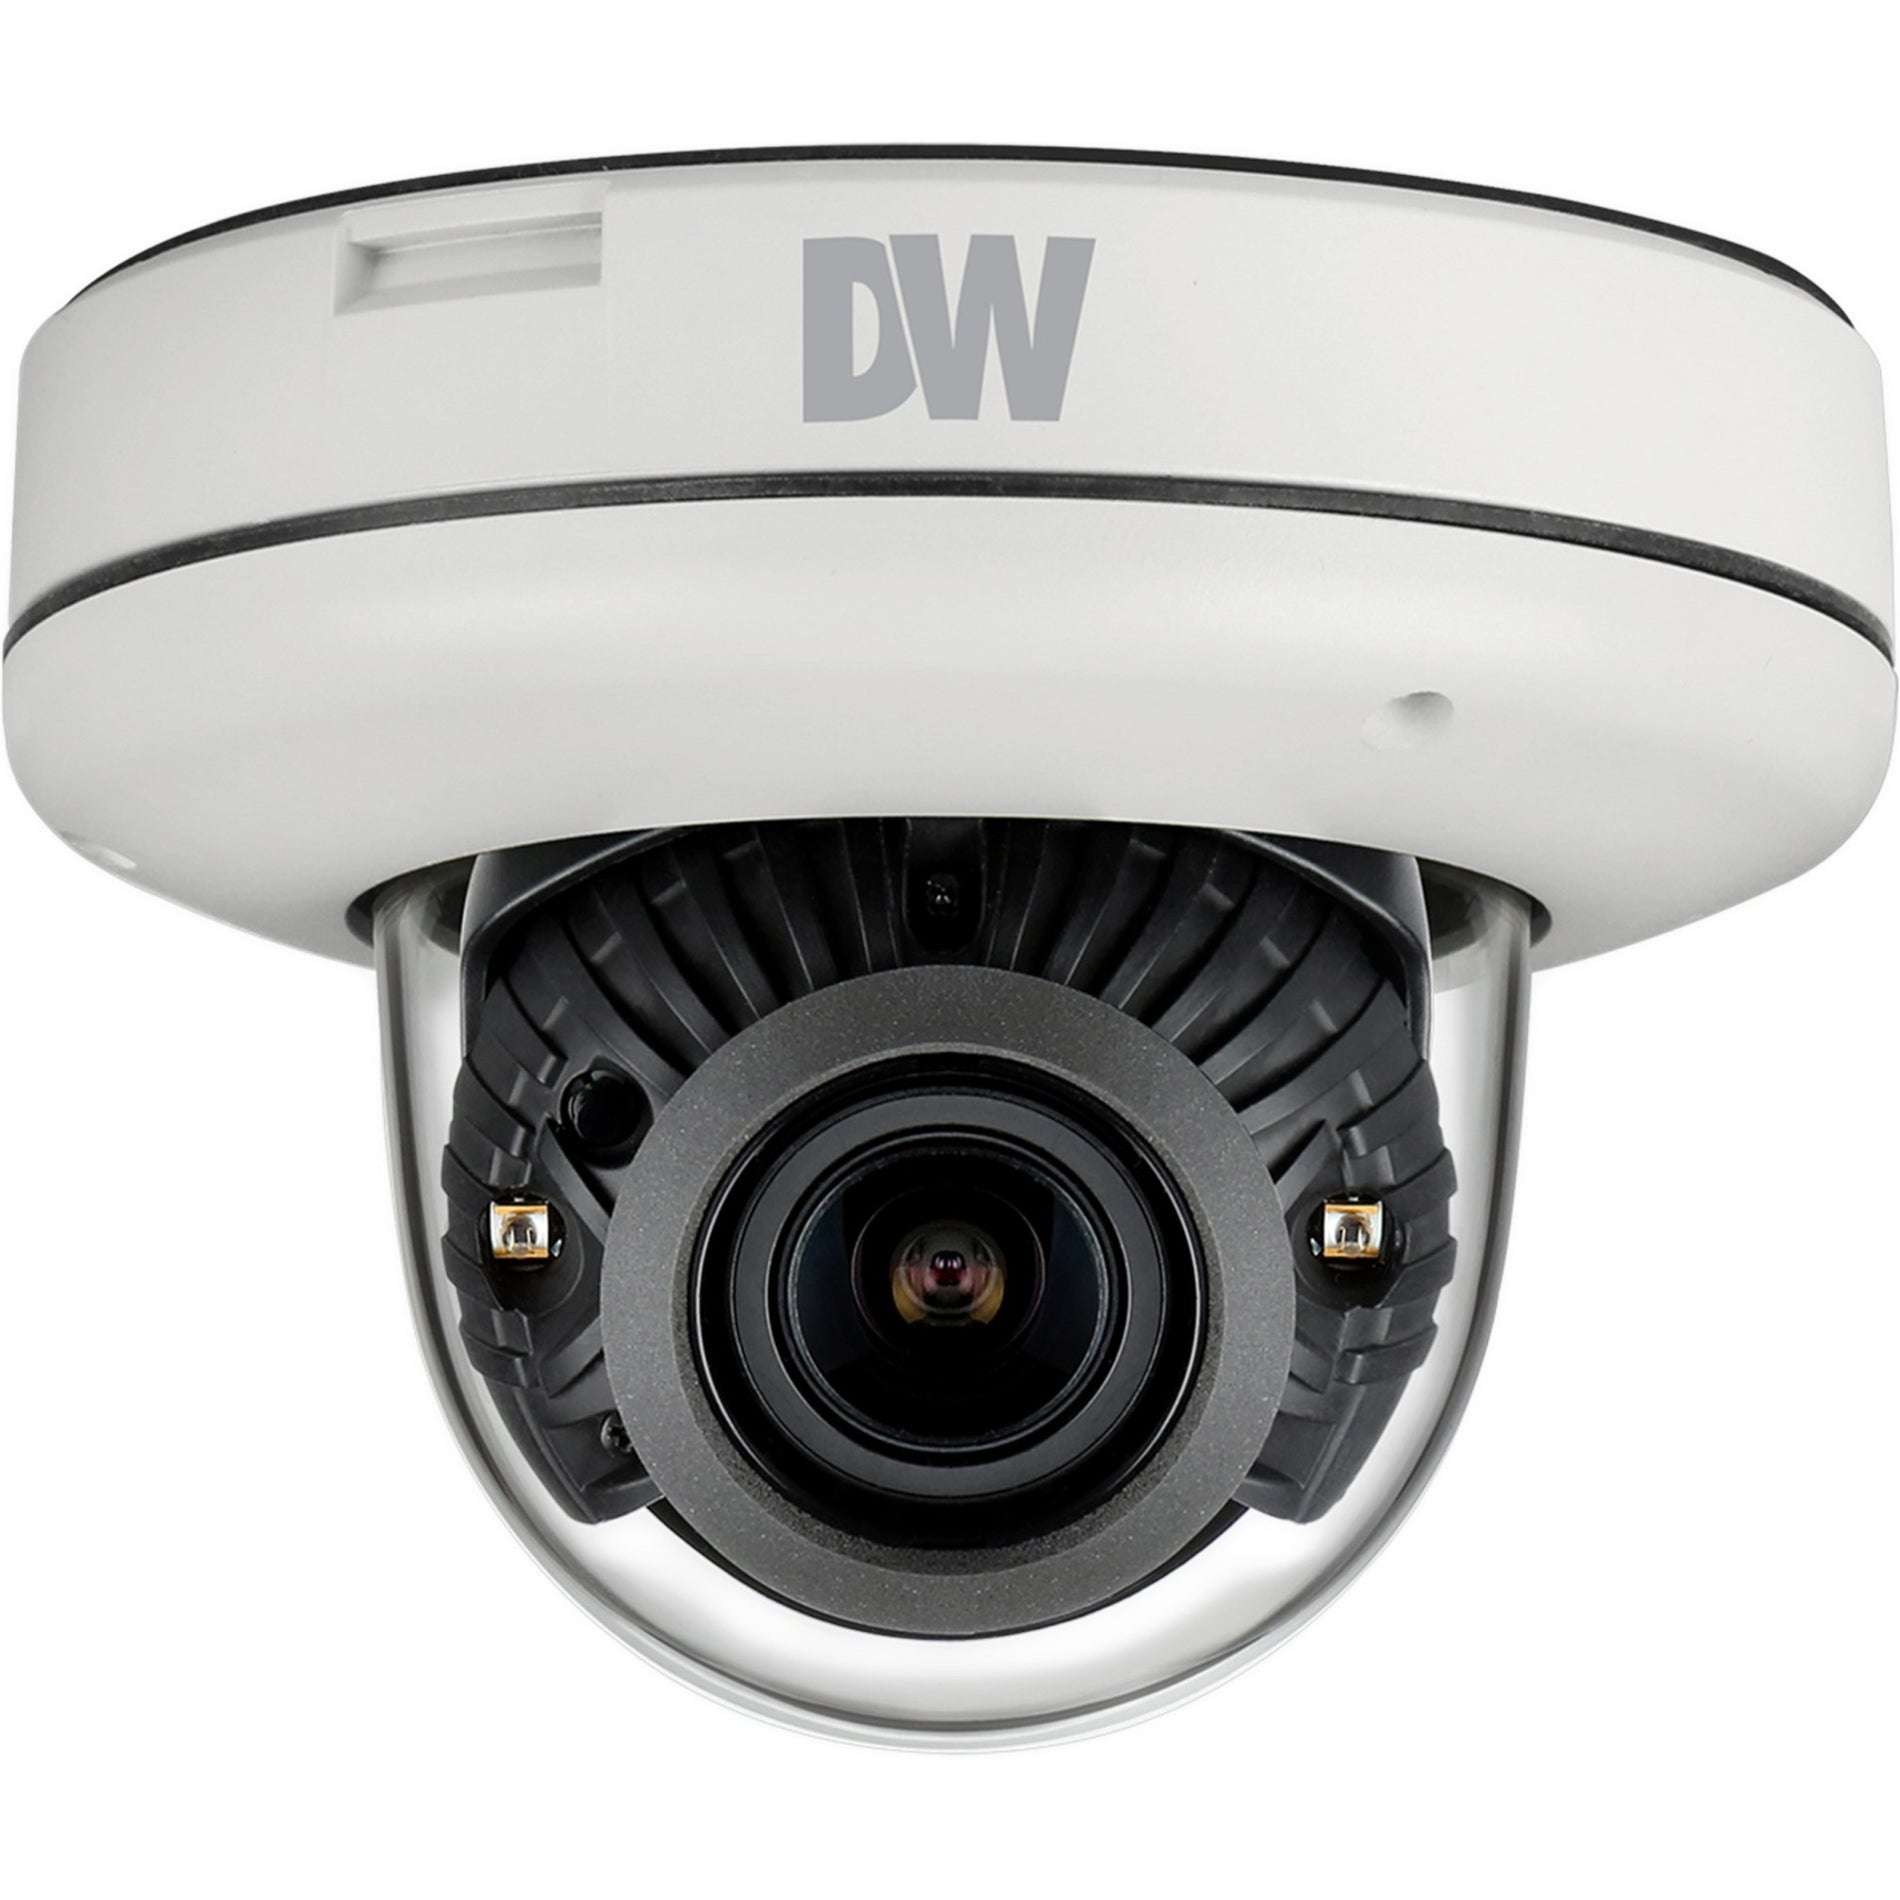 Digital Watchdog DWC-MV85WIATW 5MP Color in Near-Total Darkness Low-Profile Vandal Dome IP Camera with IVA, Varifocal Lens, 5x Optical Zoom, H.265 Video Format, 1920 x 1080 Maximum Video Resolution